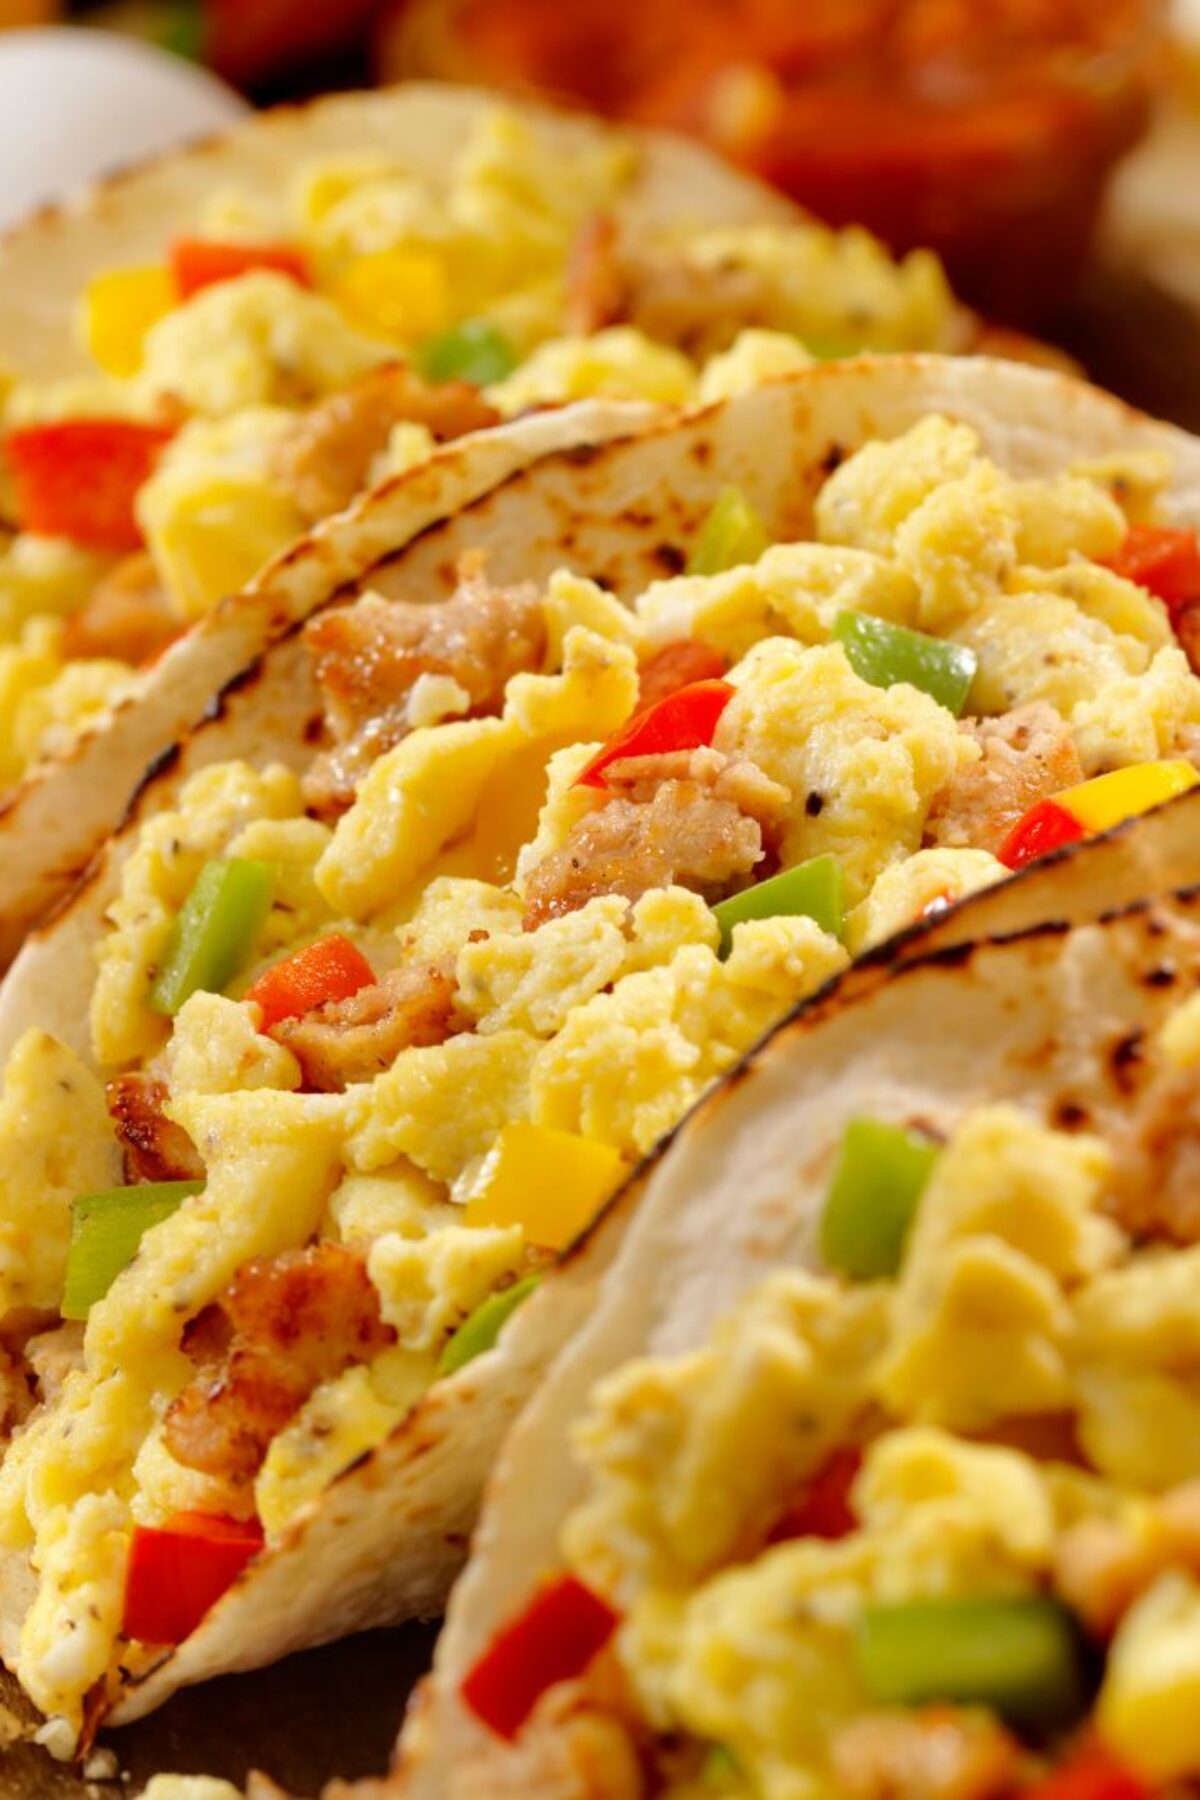 Soft Breakfast Taco with Scrambled Eggs, Sausage,Peppers and Cheddar Cheese - Photographed on Hasselblad H3D2-39mb Camera